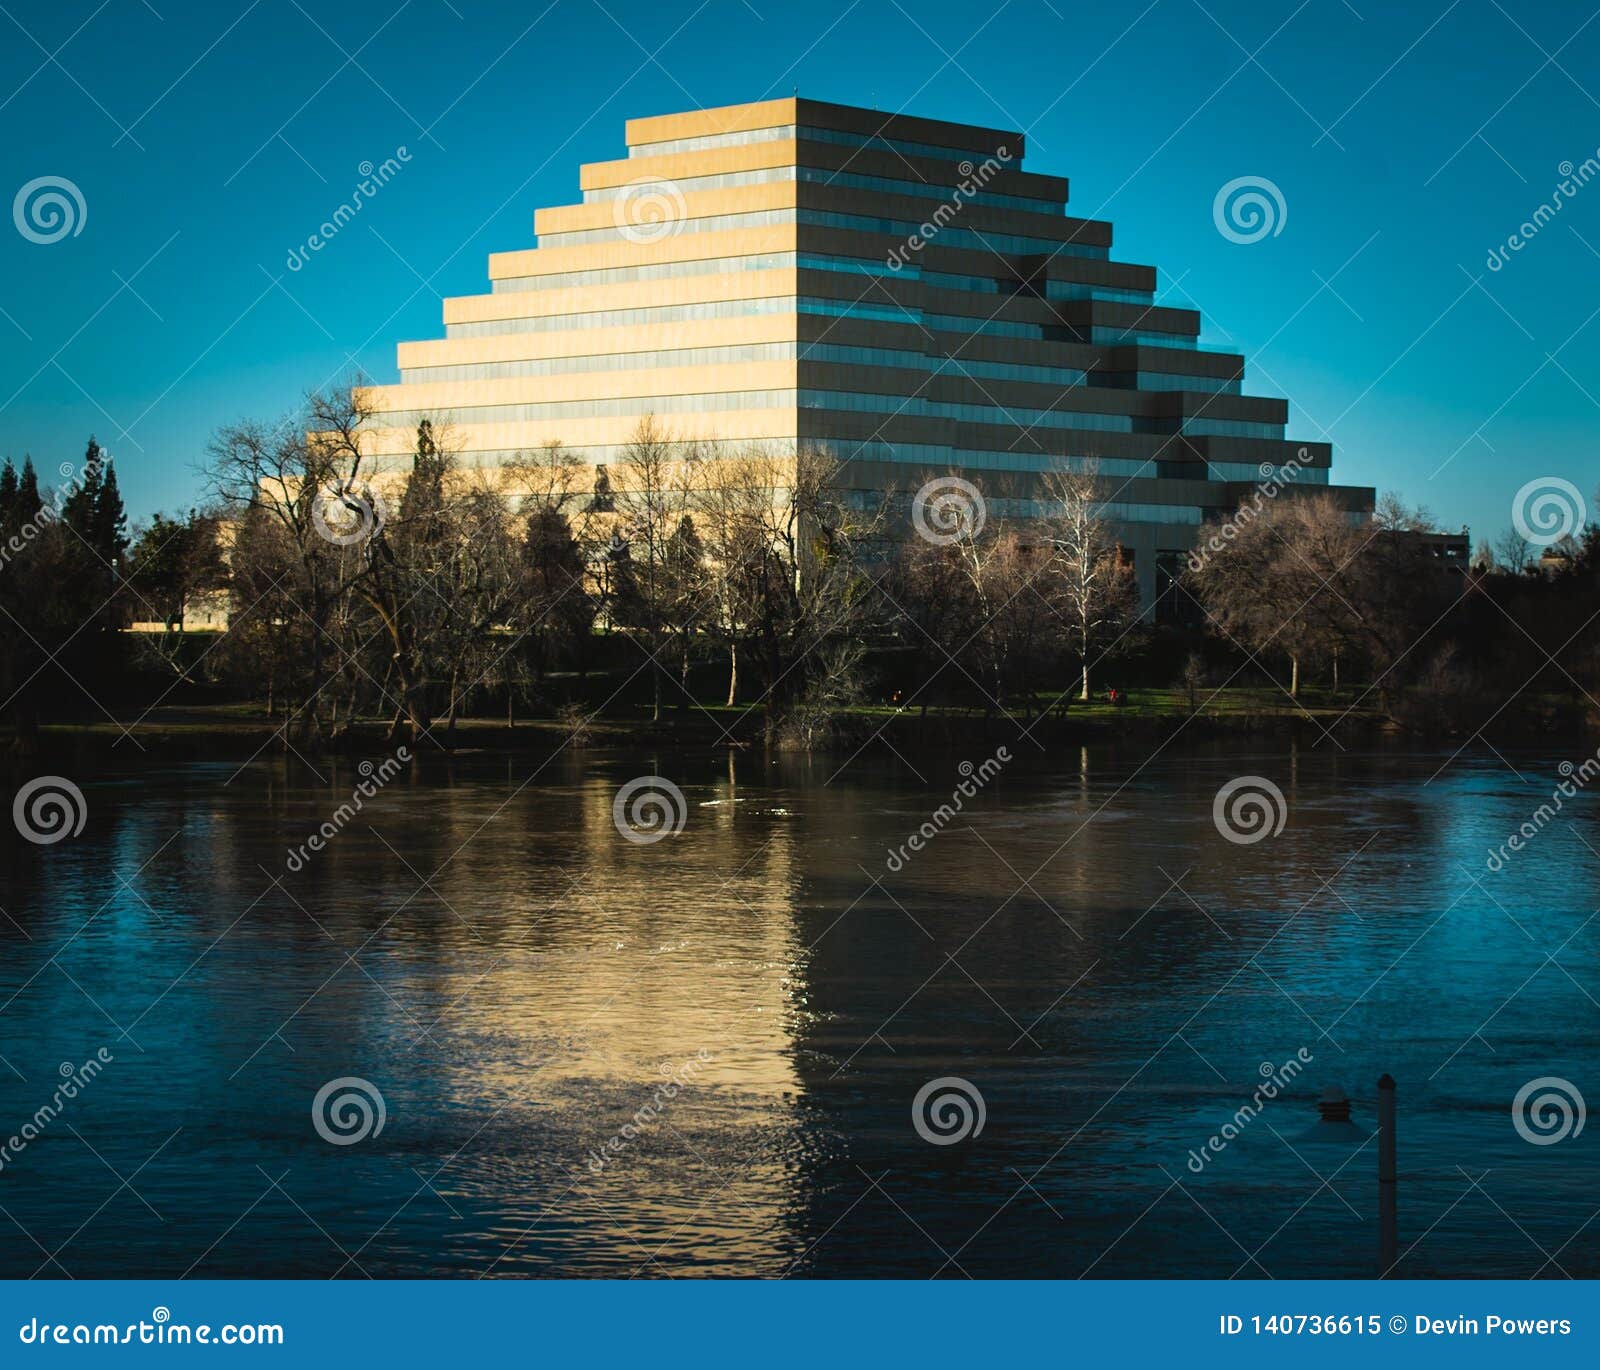 List 105+ Images what is the pyramid building in sacramento Superb